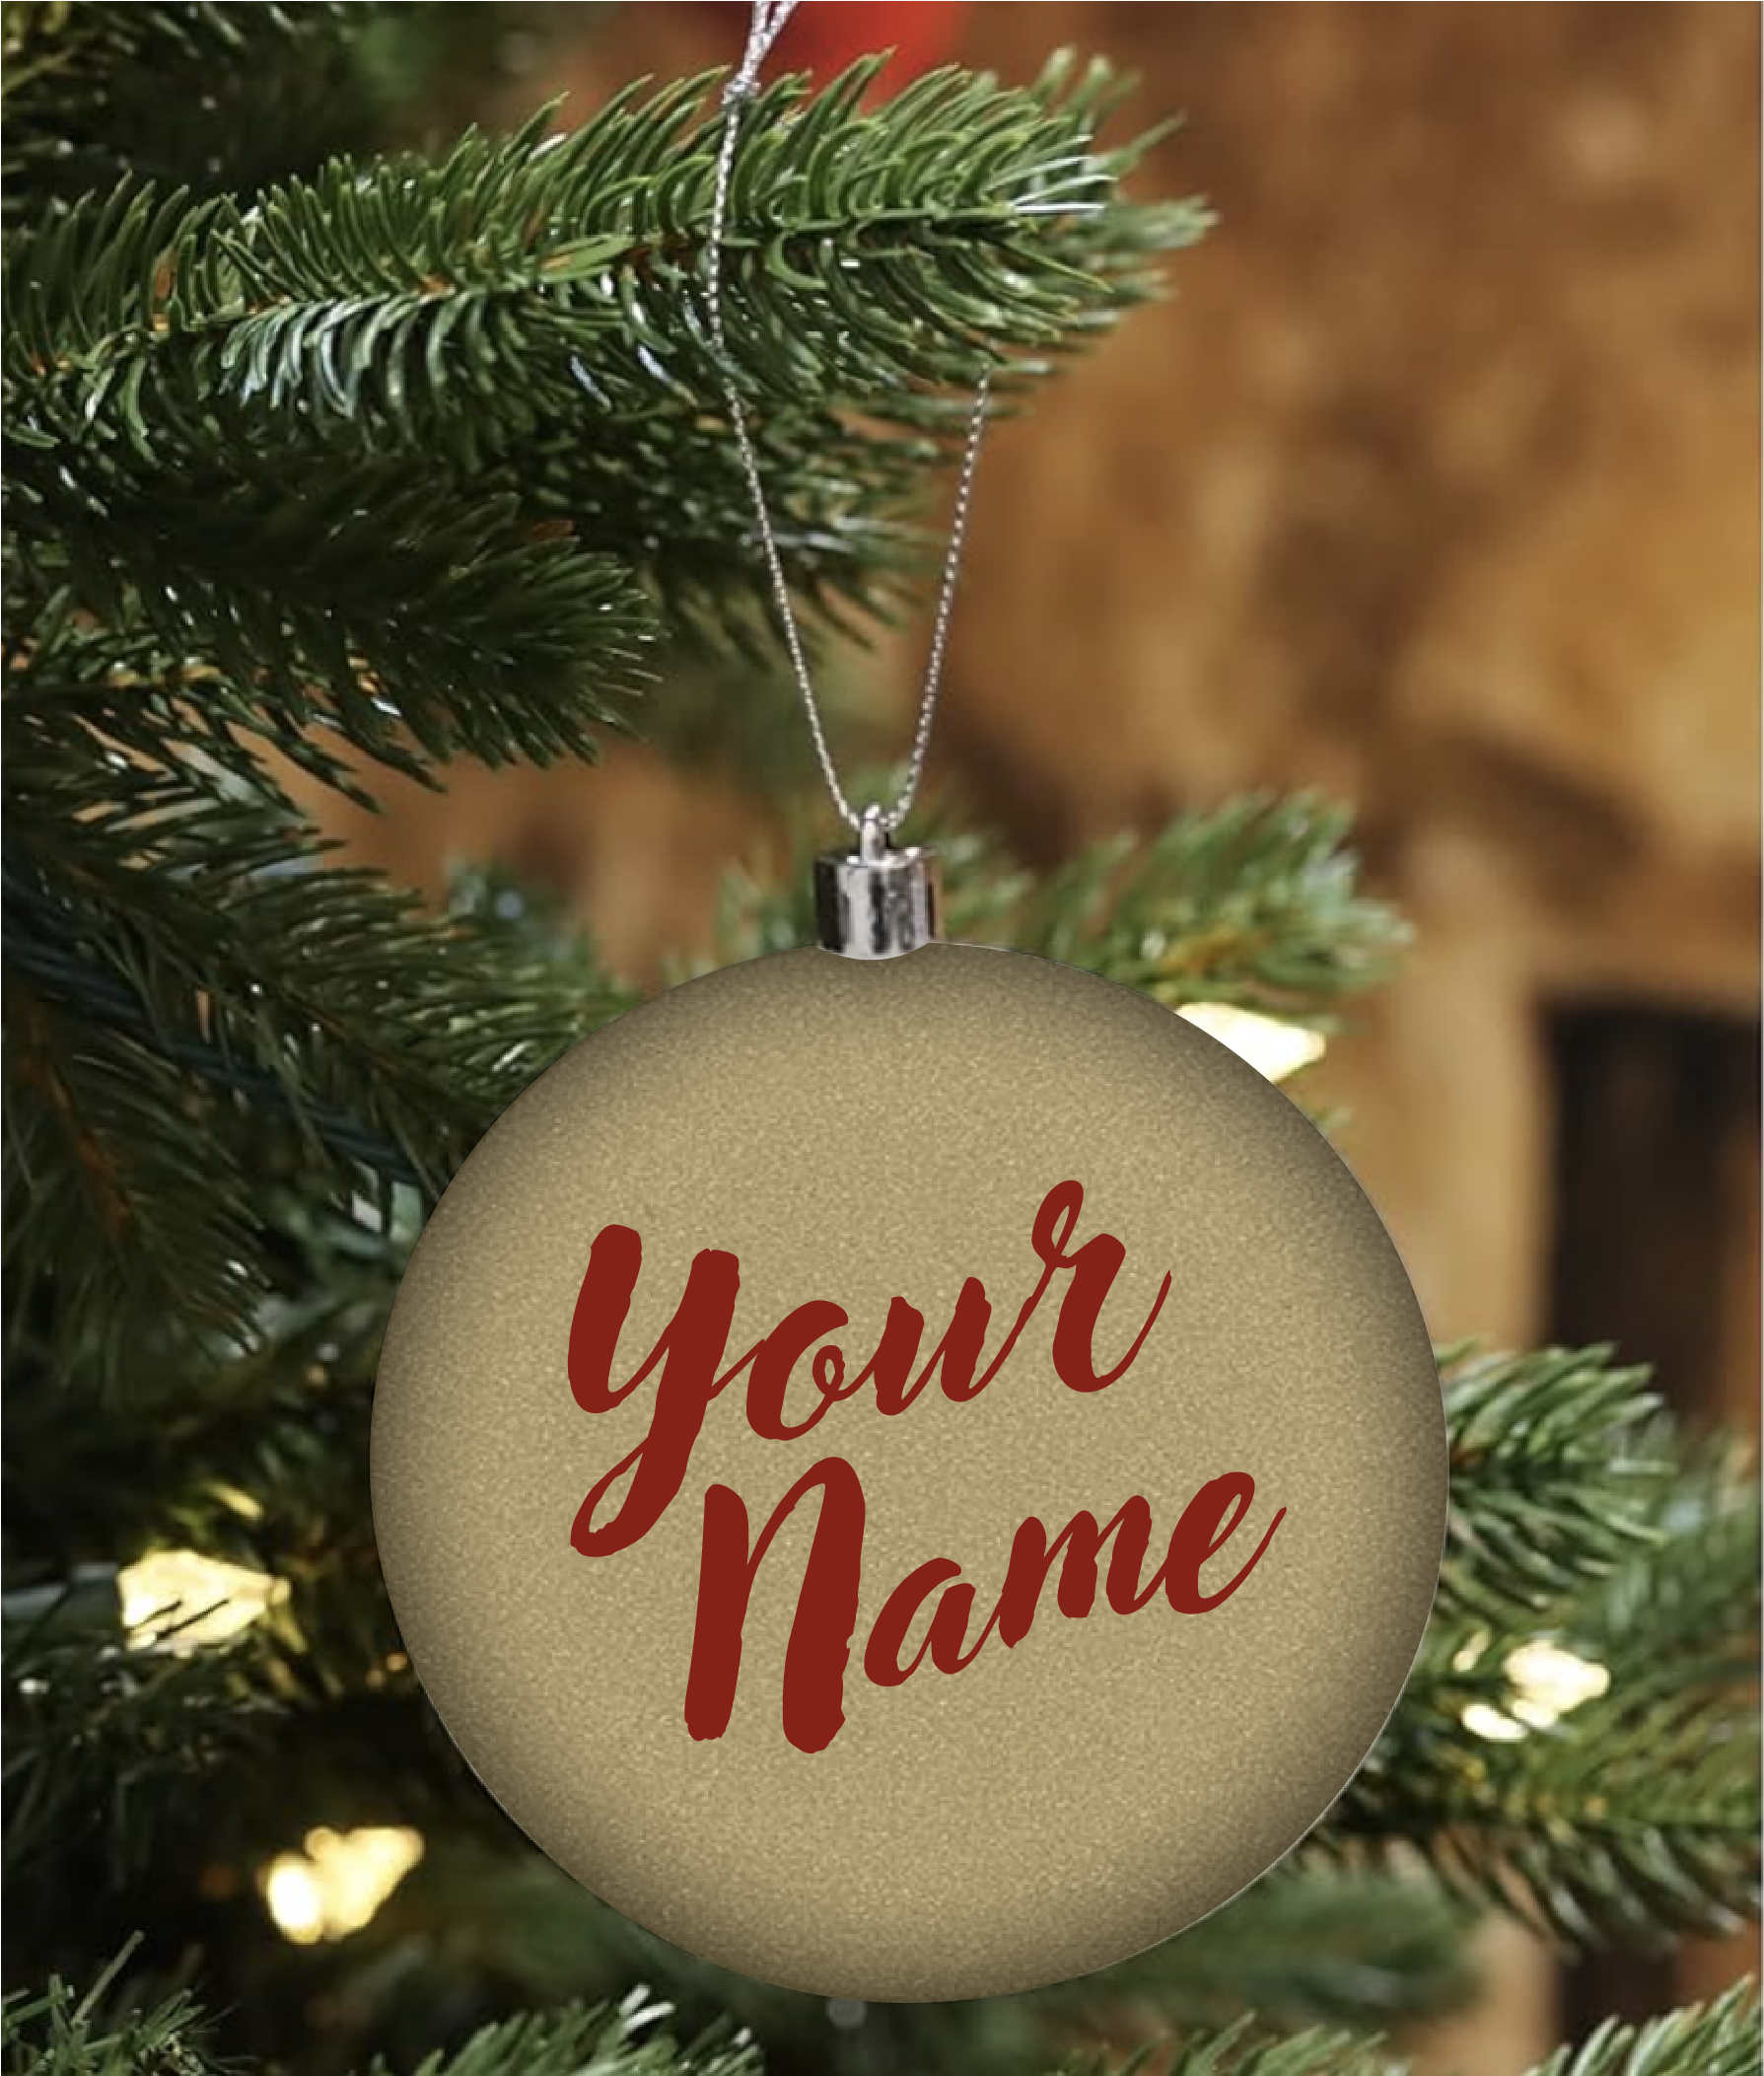 Customize your Ornament